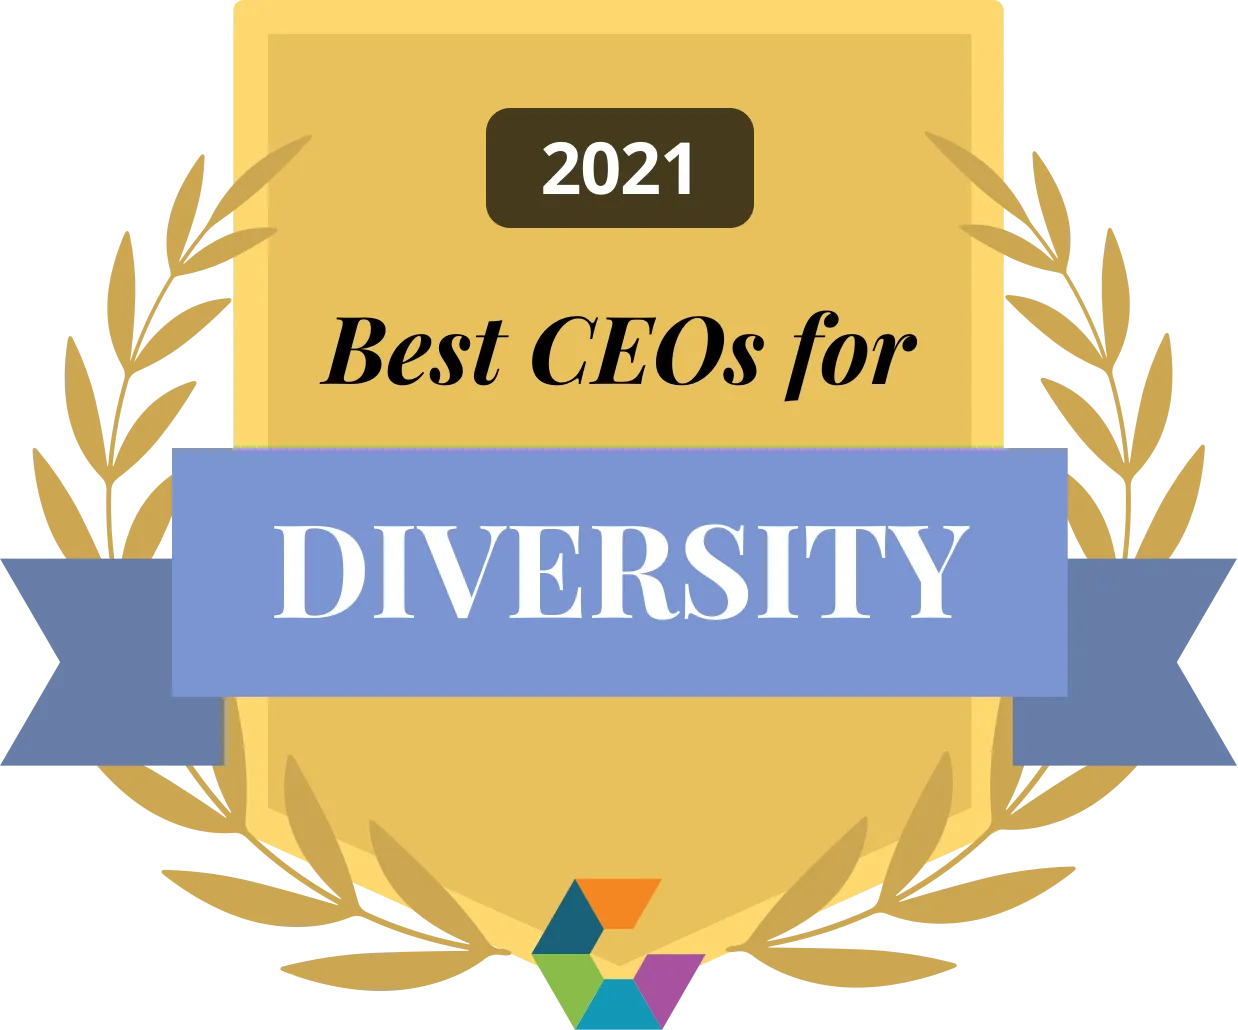 Comparably Best CEOs for Diversity 2021